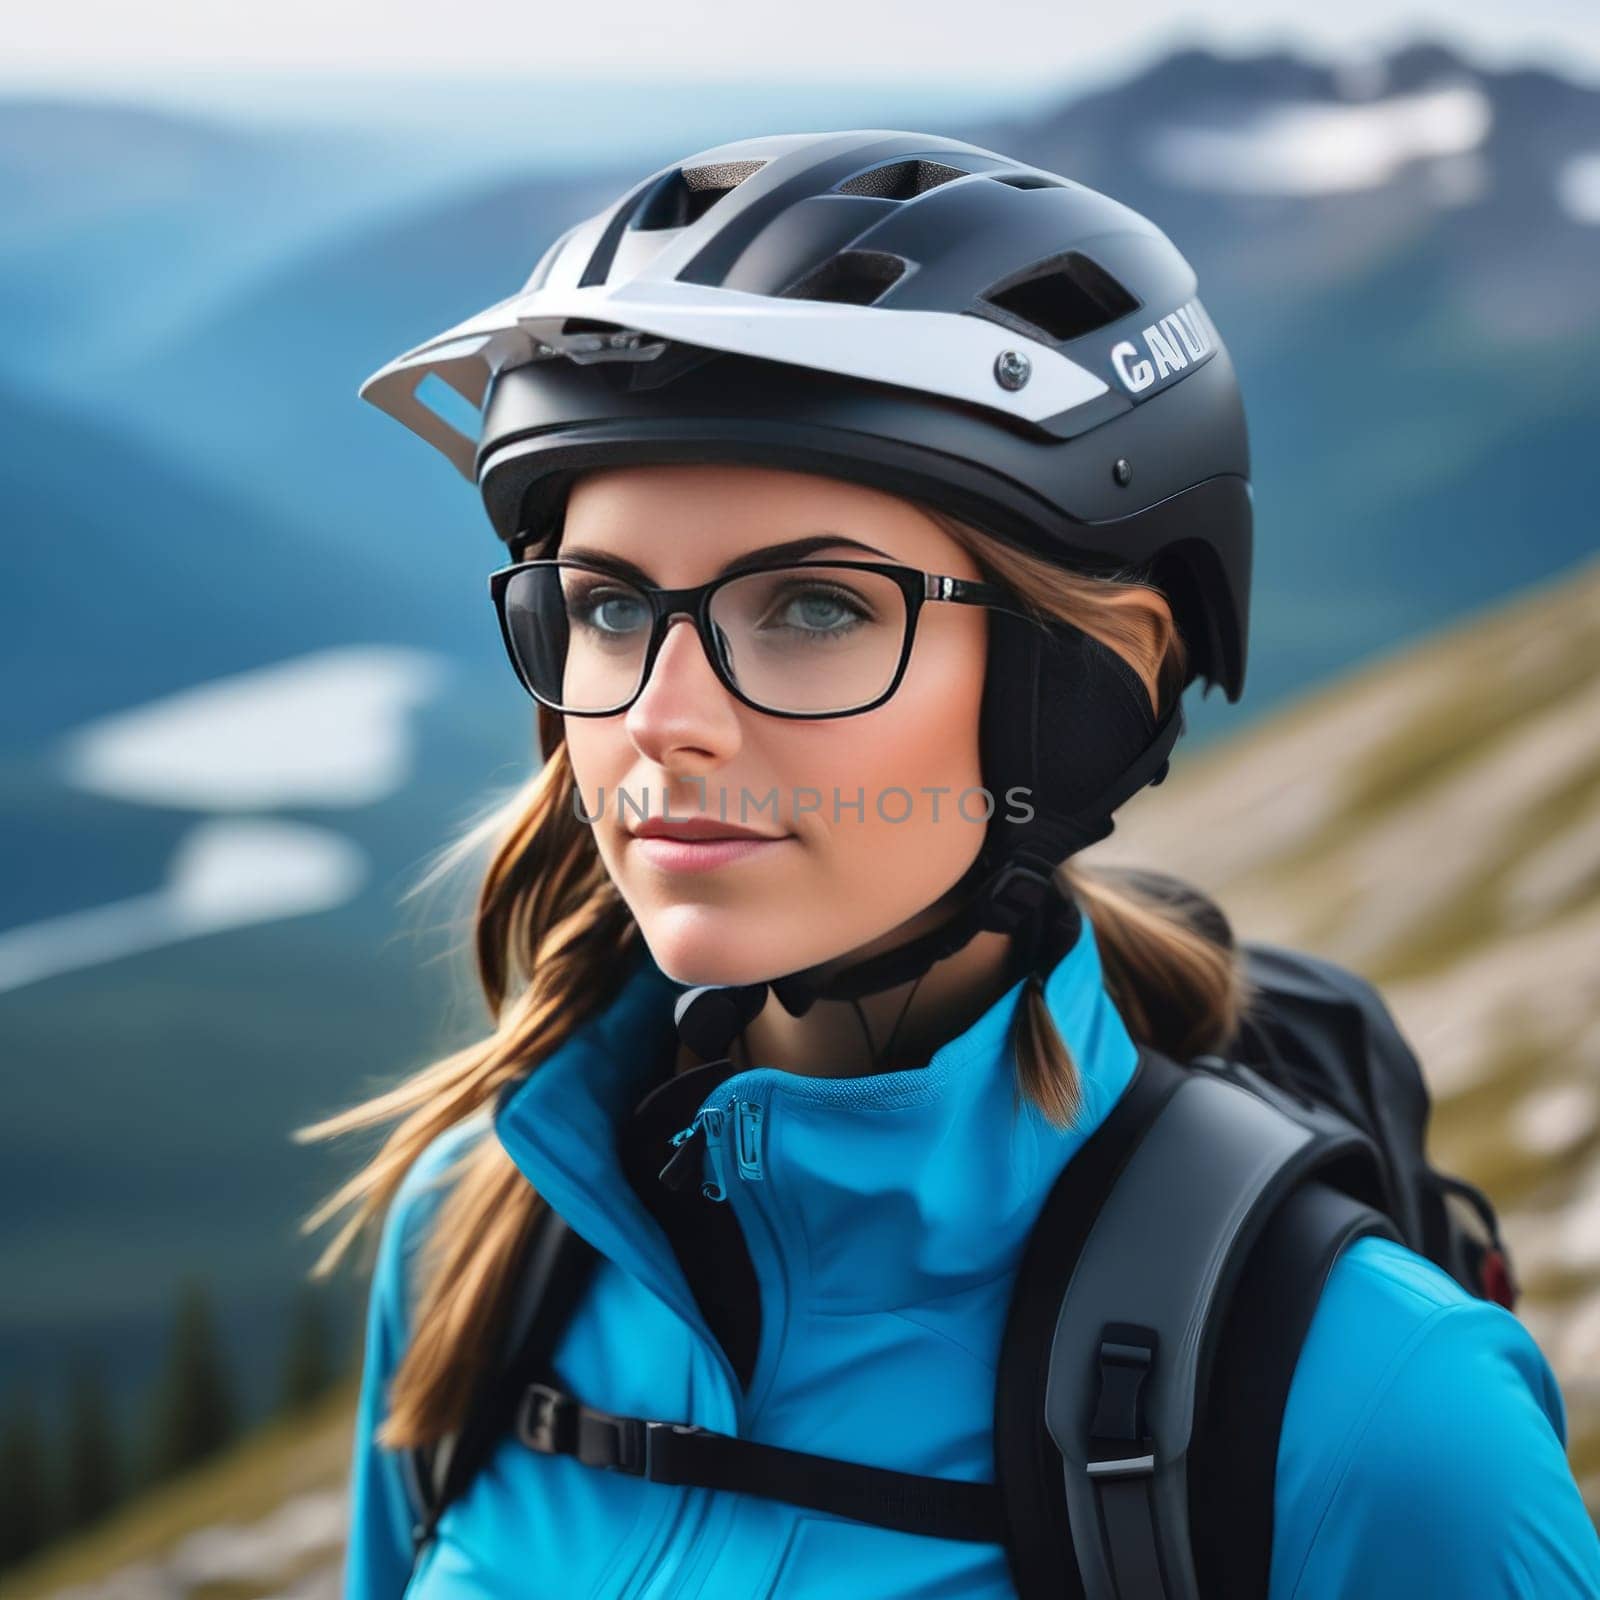 Woman wearing helmet and glasses stands confidently before towering mountain backdrop ready for adventure and exploration. She may be gearing up for bicycle ride or some other outdoor activity